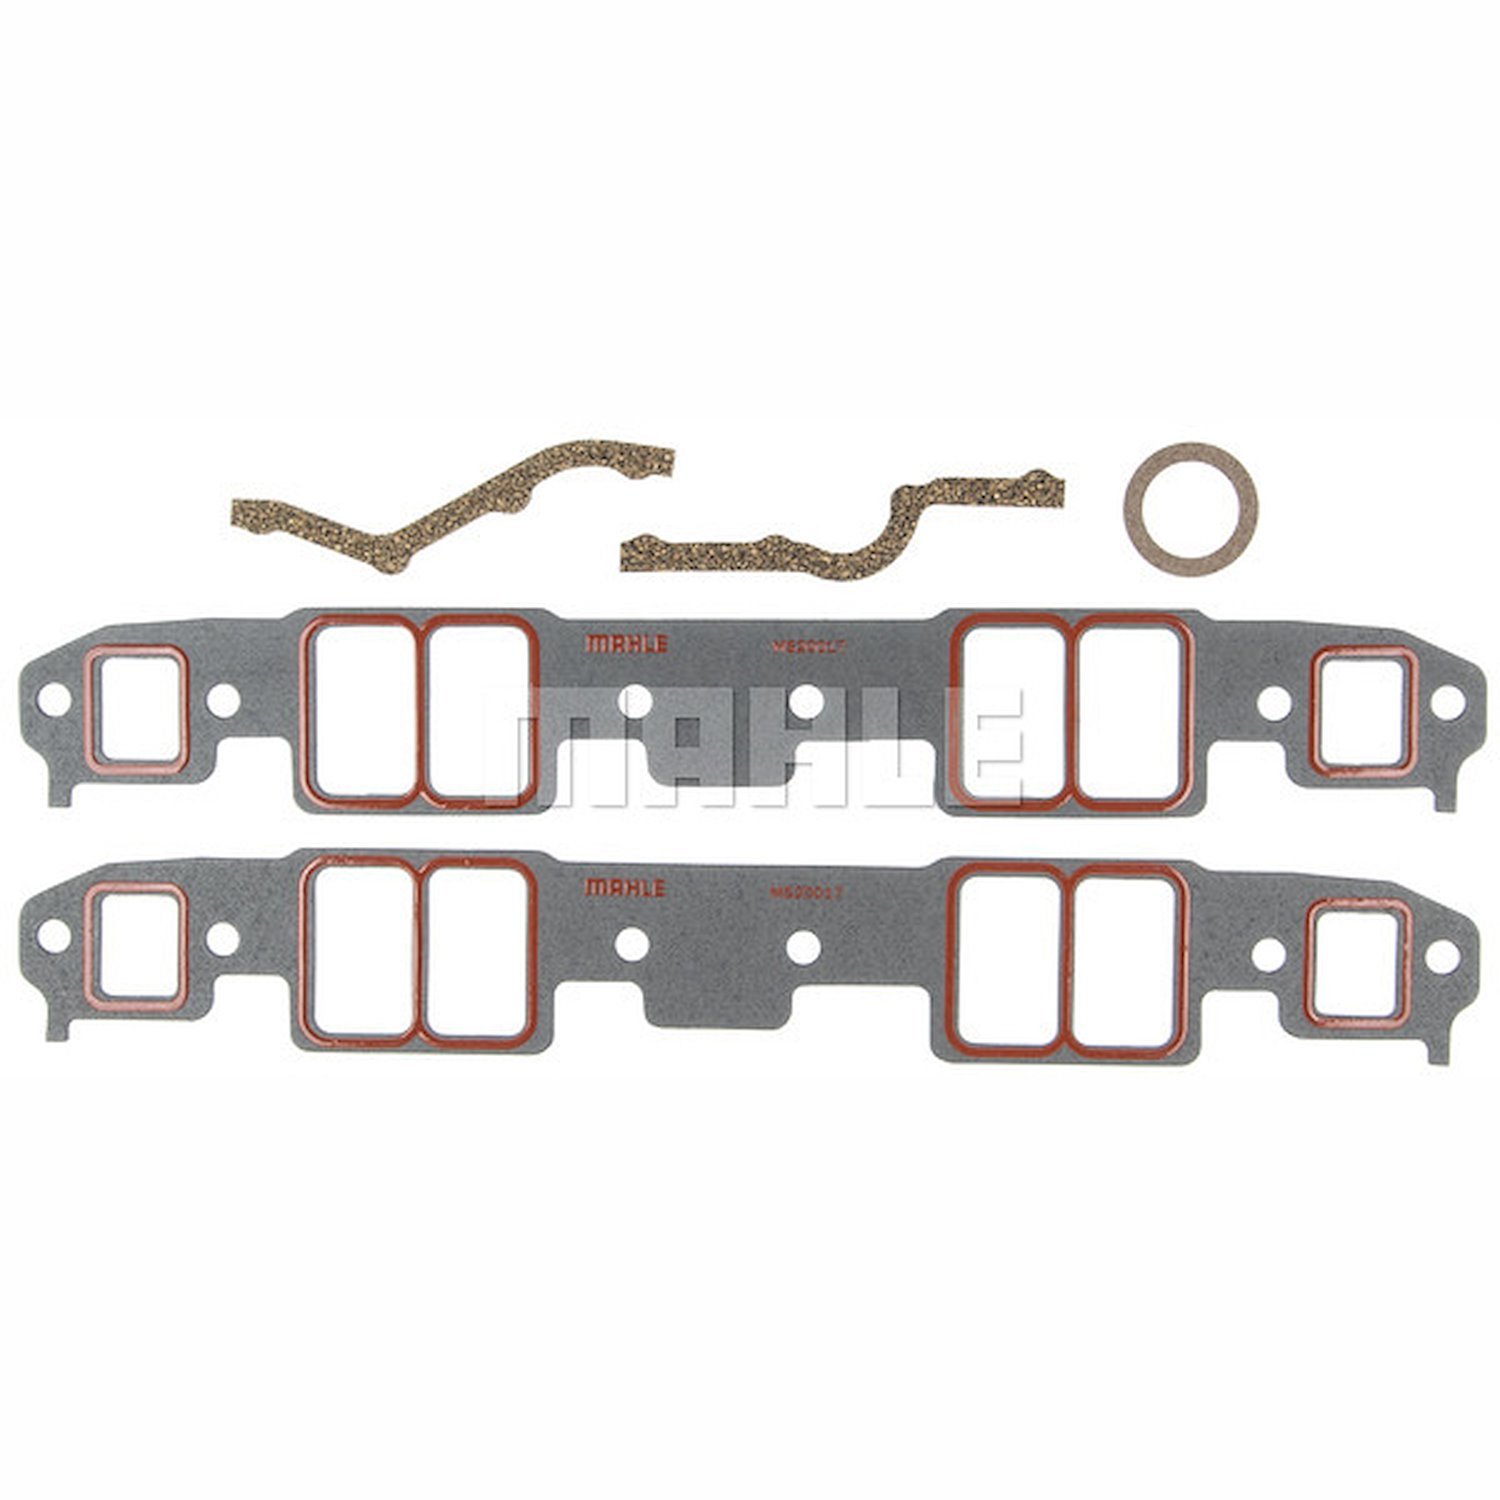 Intake Manifold Gasket Set for Small Block Chevy 23 Degree Large Port